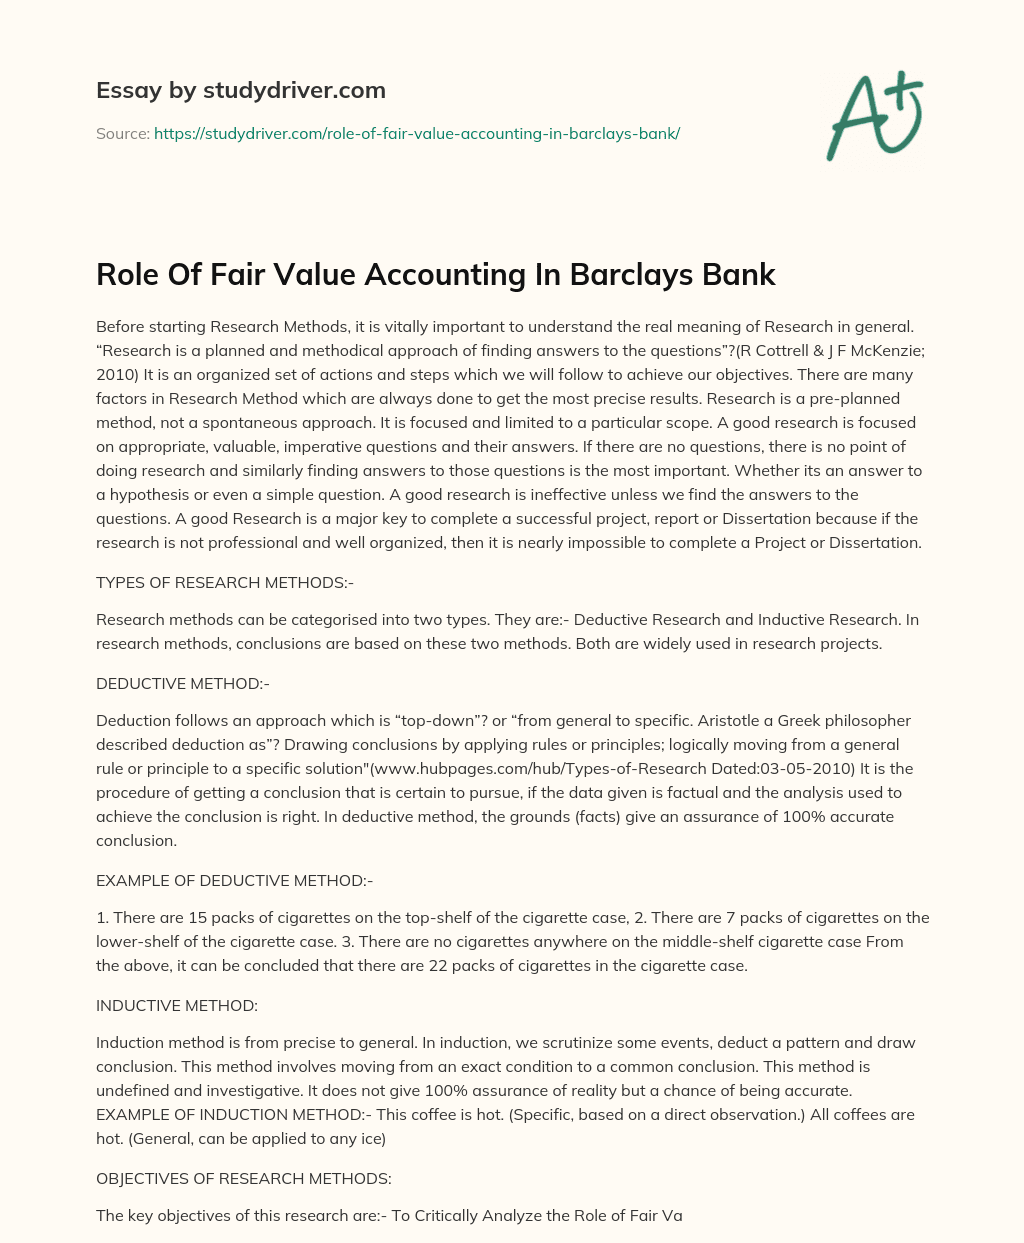 Role of Fair Value Accounting in Barclays Bank essay